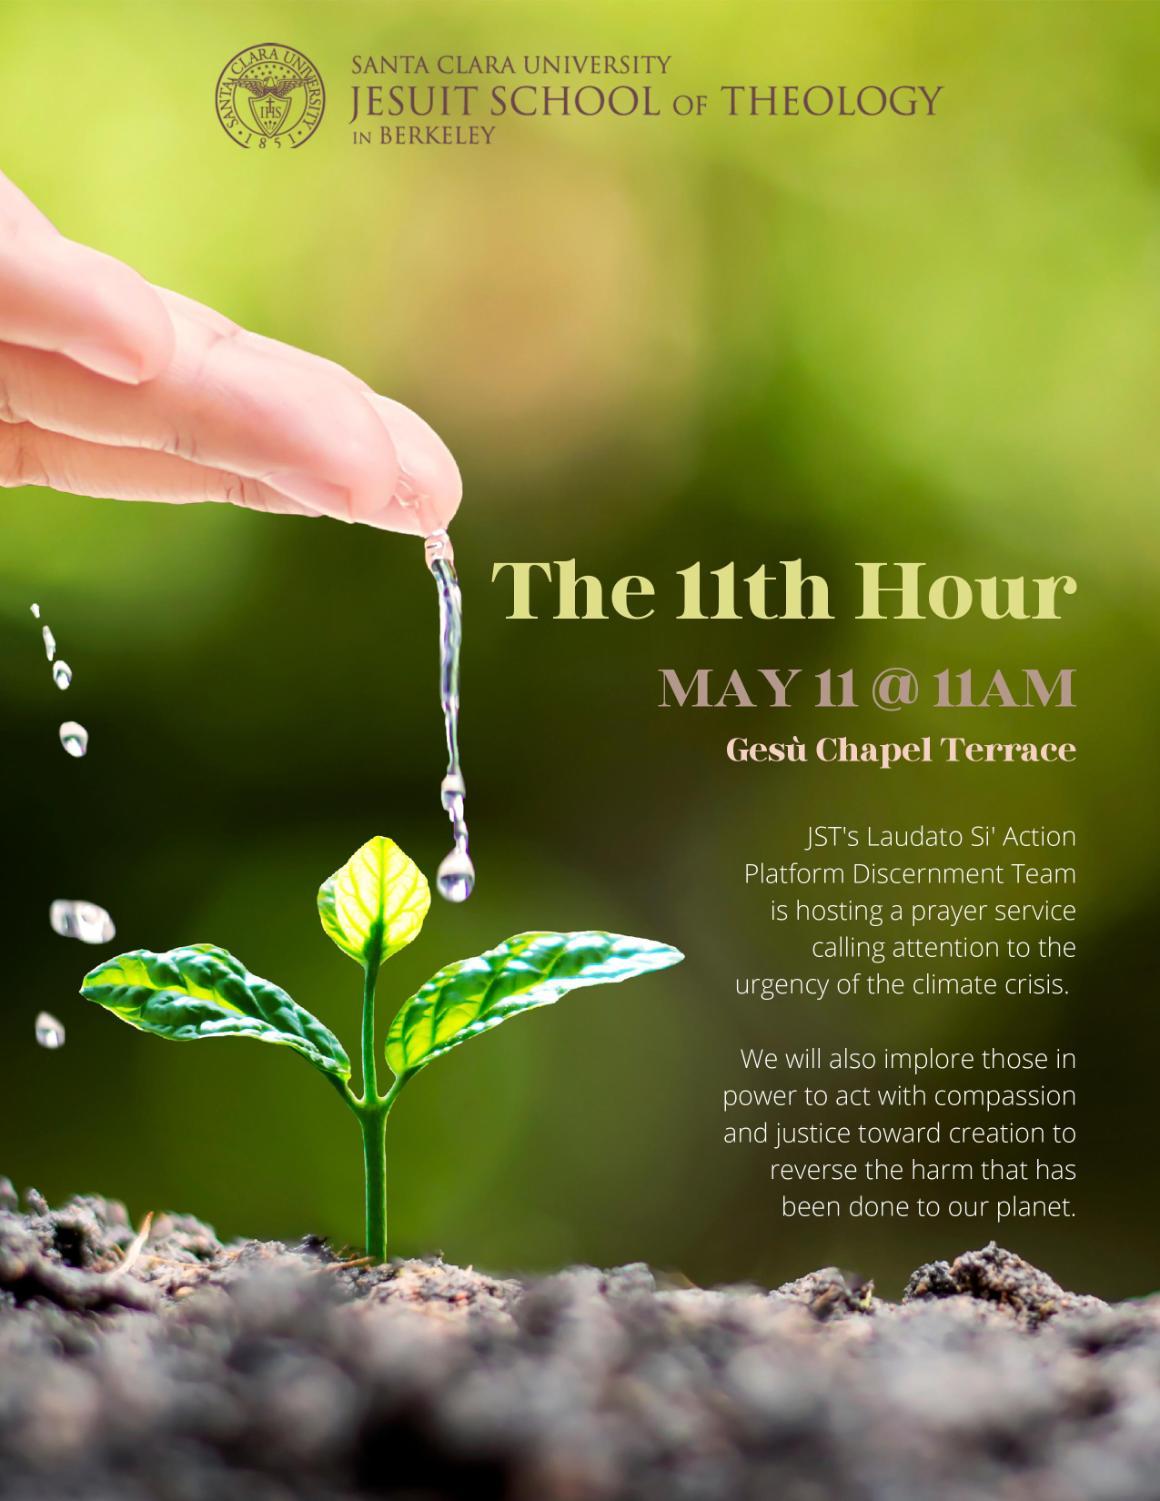 flyer of the 11th hour event, held on May 11th at 11AM